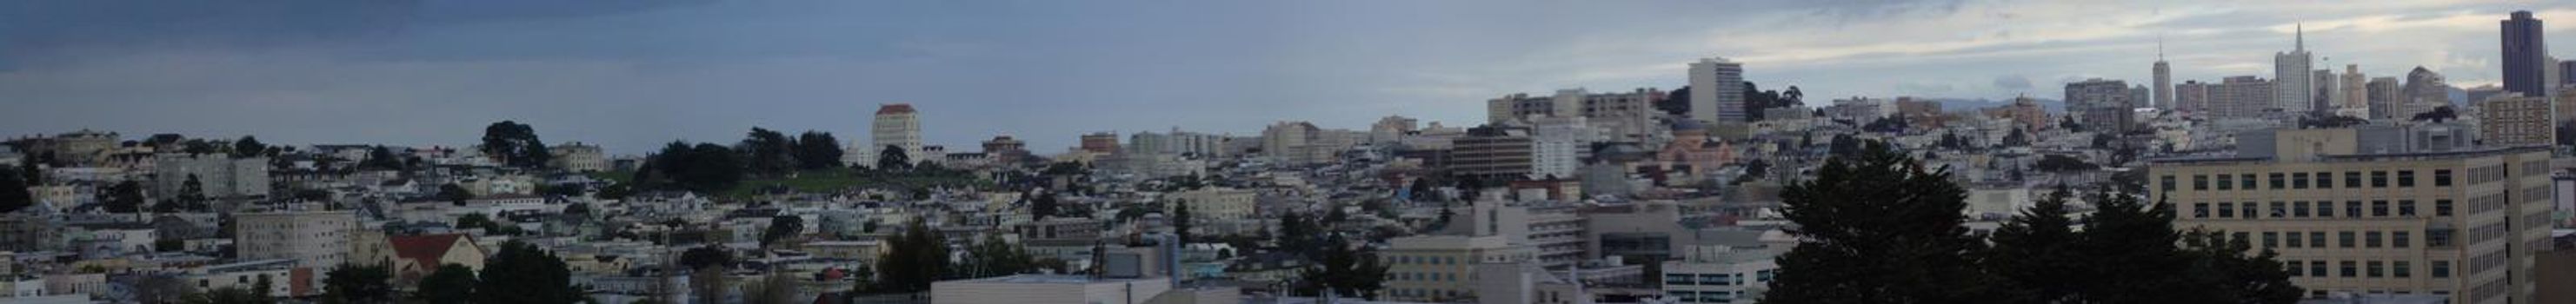 San Francisco Cityscape Panorama with Downtown landmark buildings